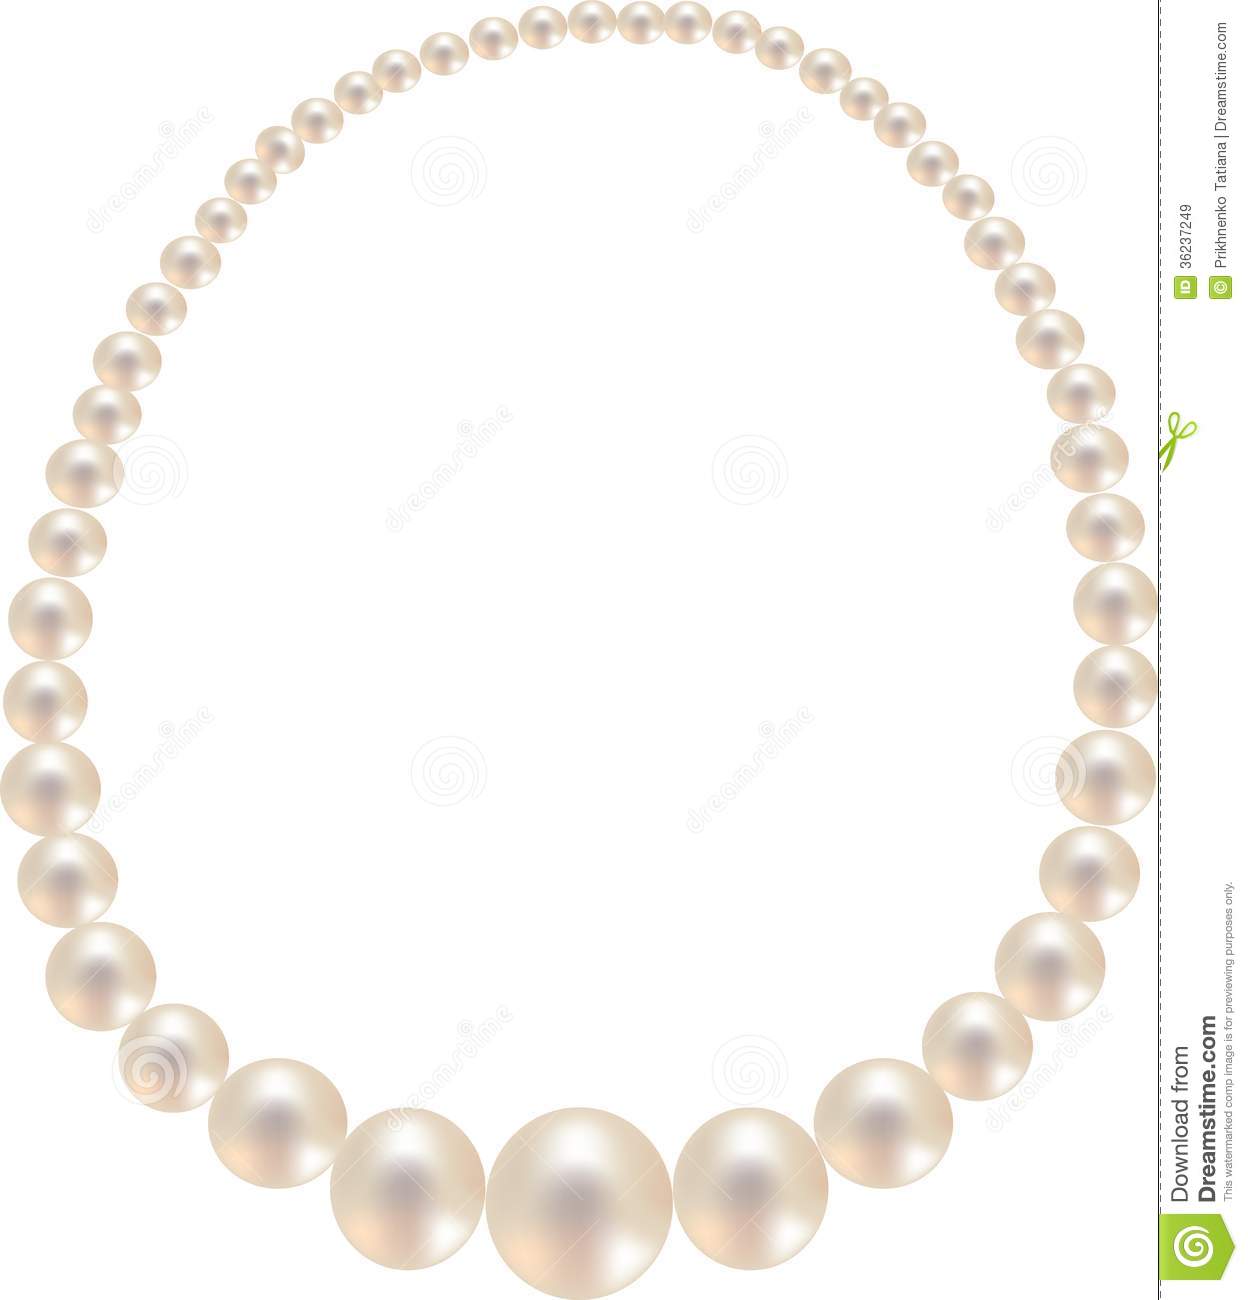 Pearl necklaces clipart